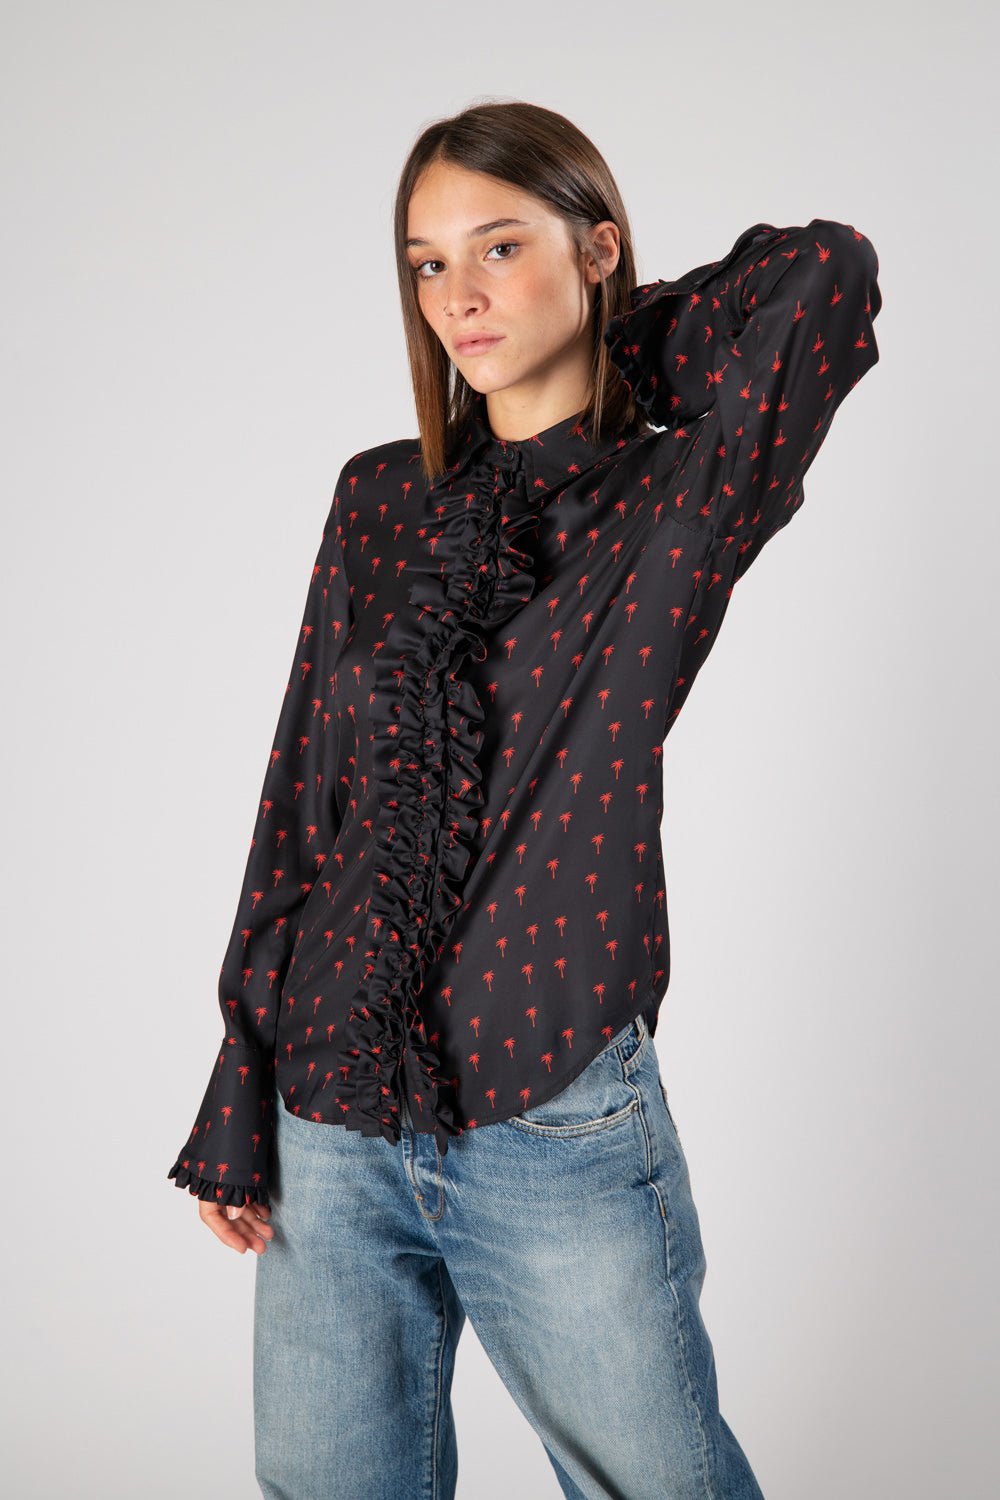 PALMS ROUCHES SHIRT Woman shirt with rouches, allover red palm print. 100% Polyester HTC LOS ANGELES